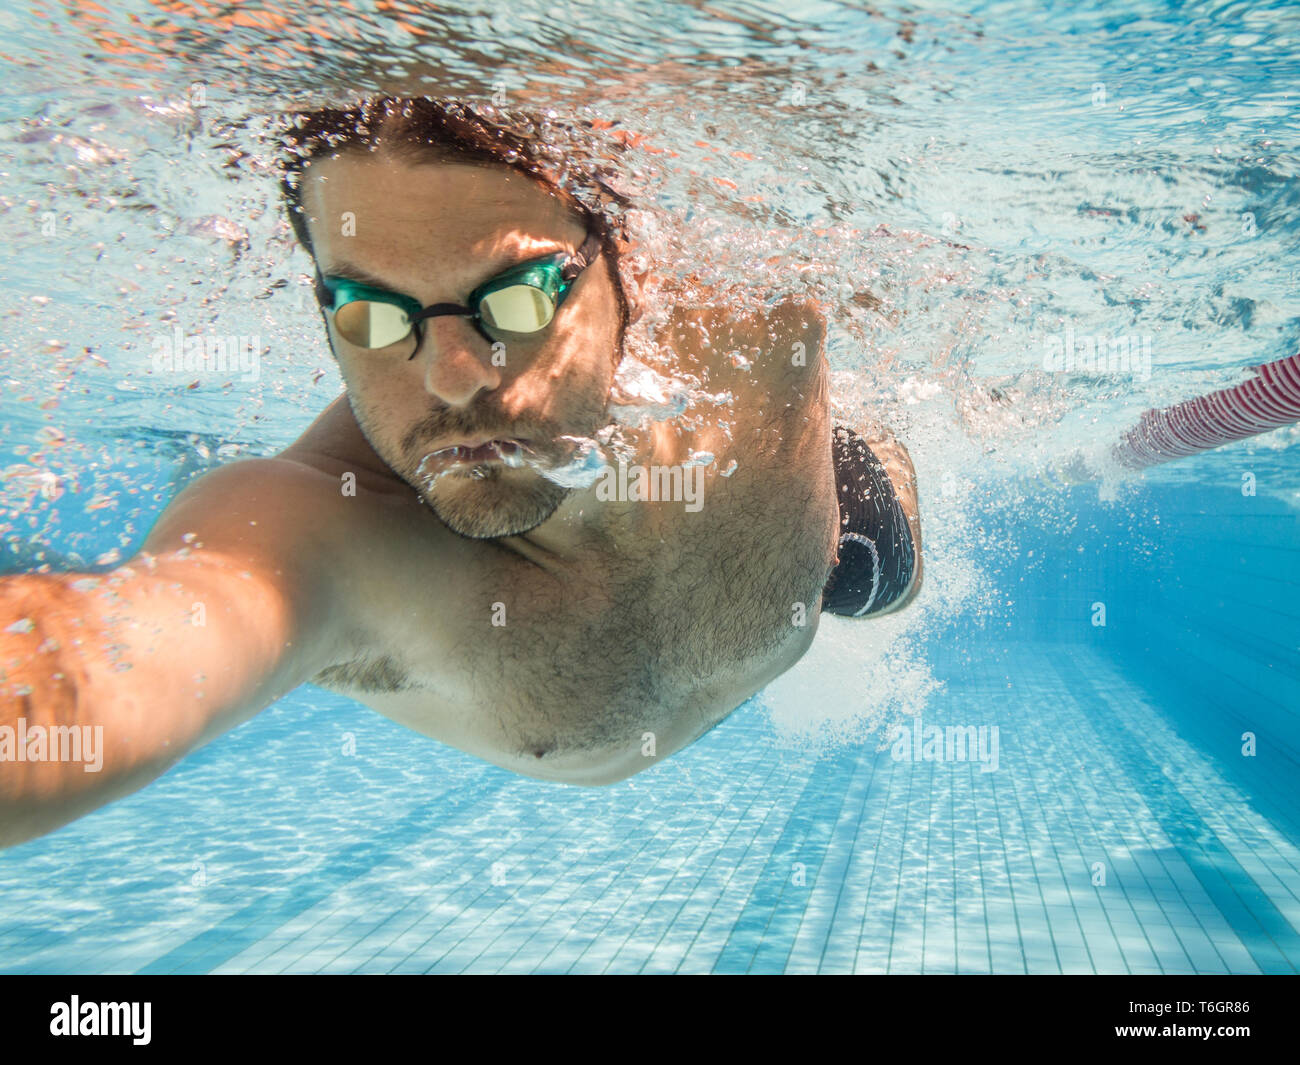 Male swimmer in the swimming pool.Underwater photo with copy space. Stock Photo